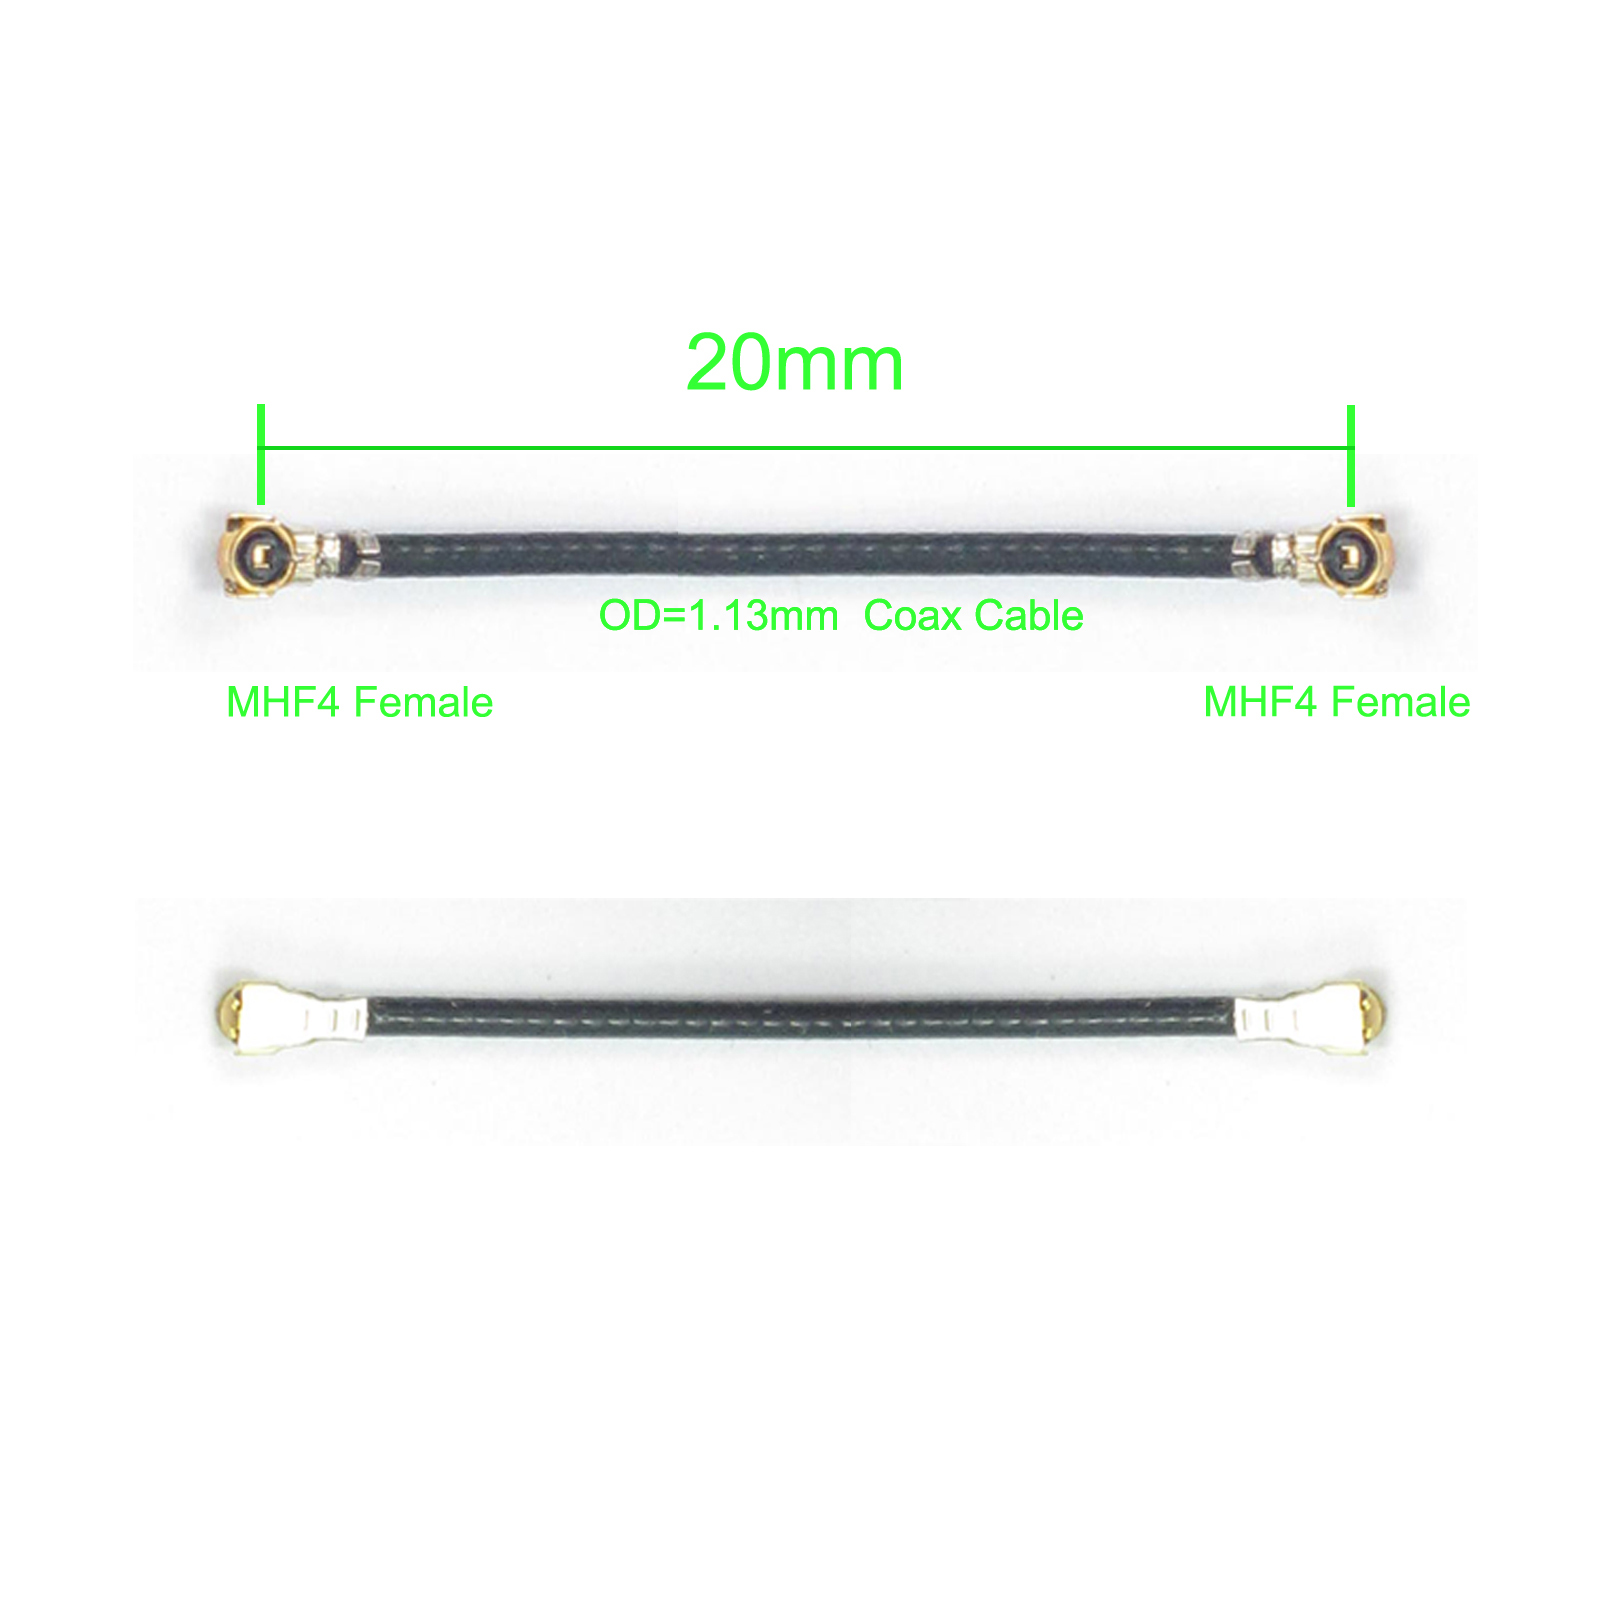 MHF4 female to MHF4 female WFL W.FL IPX4 IPEX4 RF113 OD 1.13mm Coaxial cable IPX IPEX 50ohm